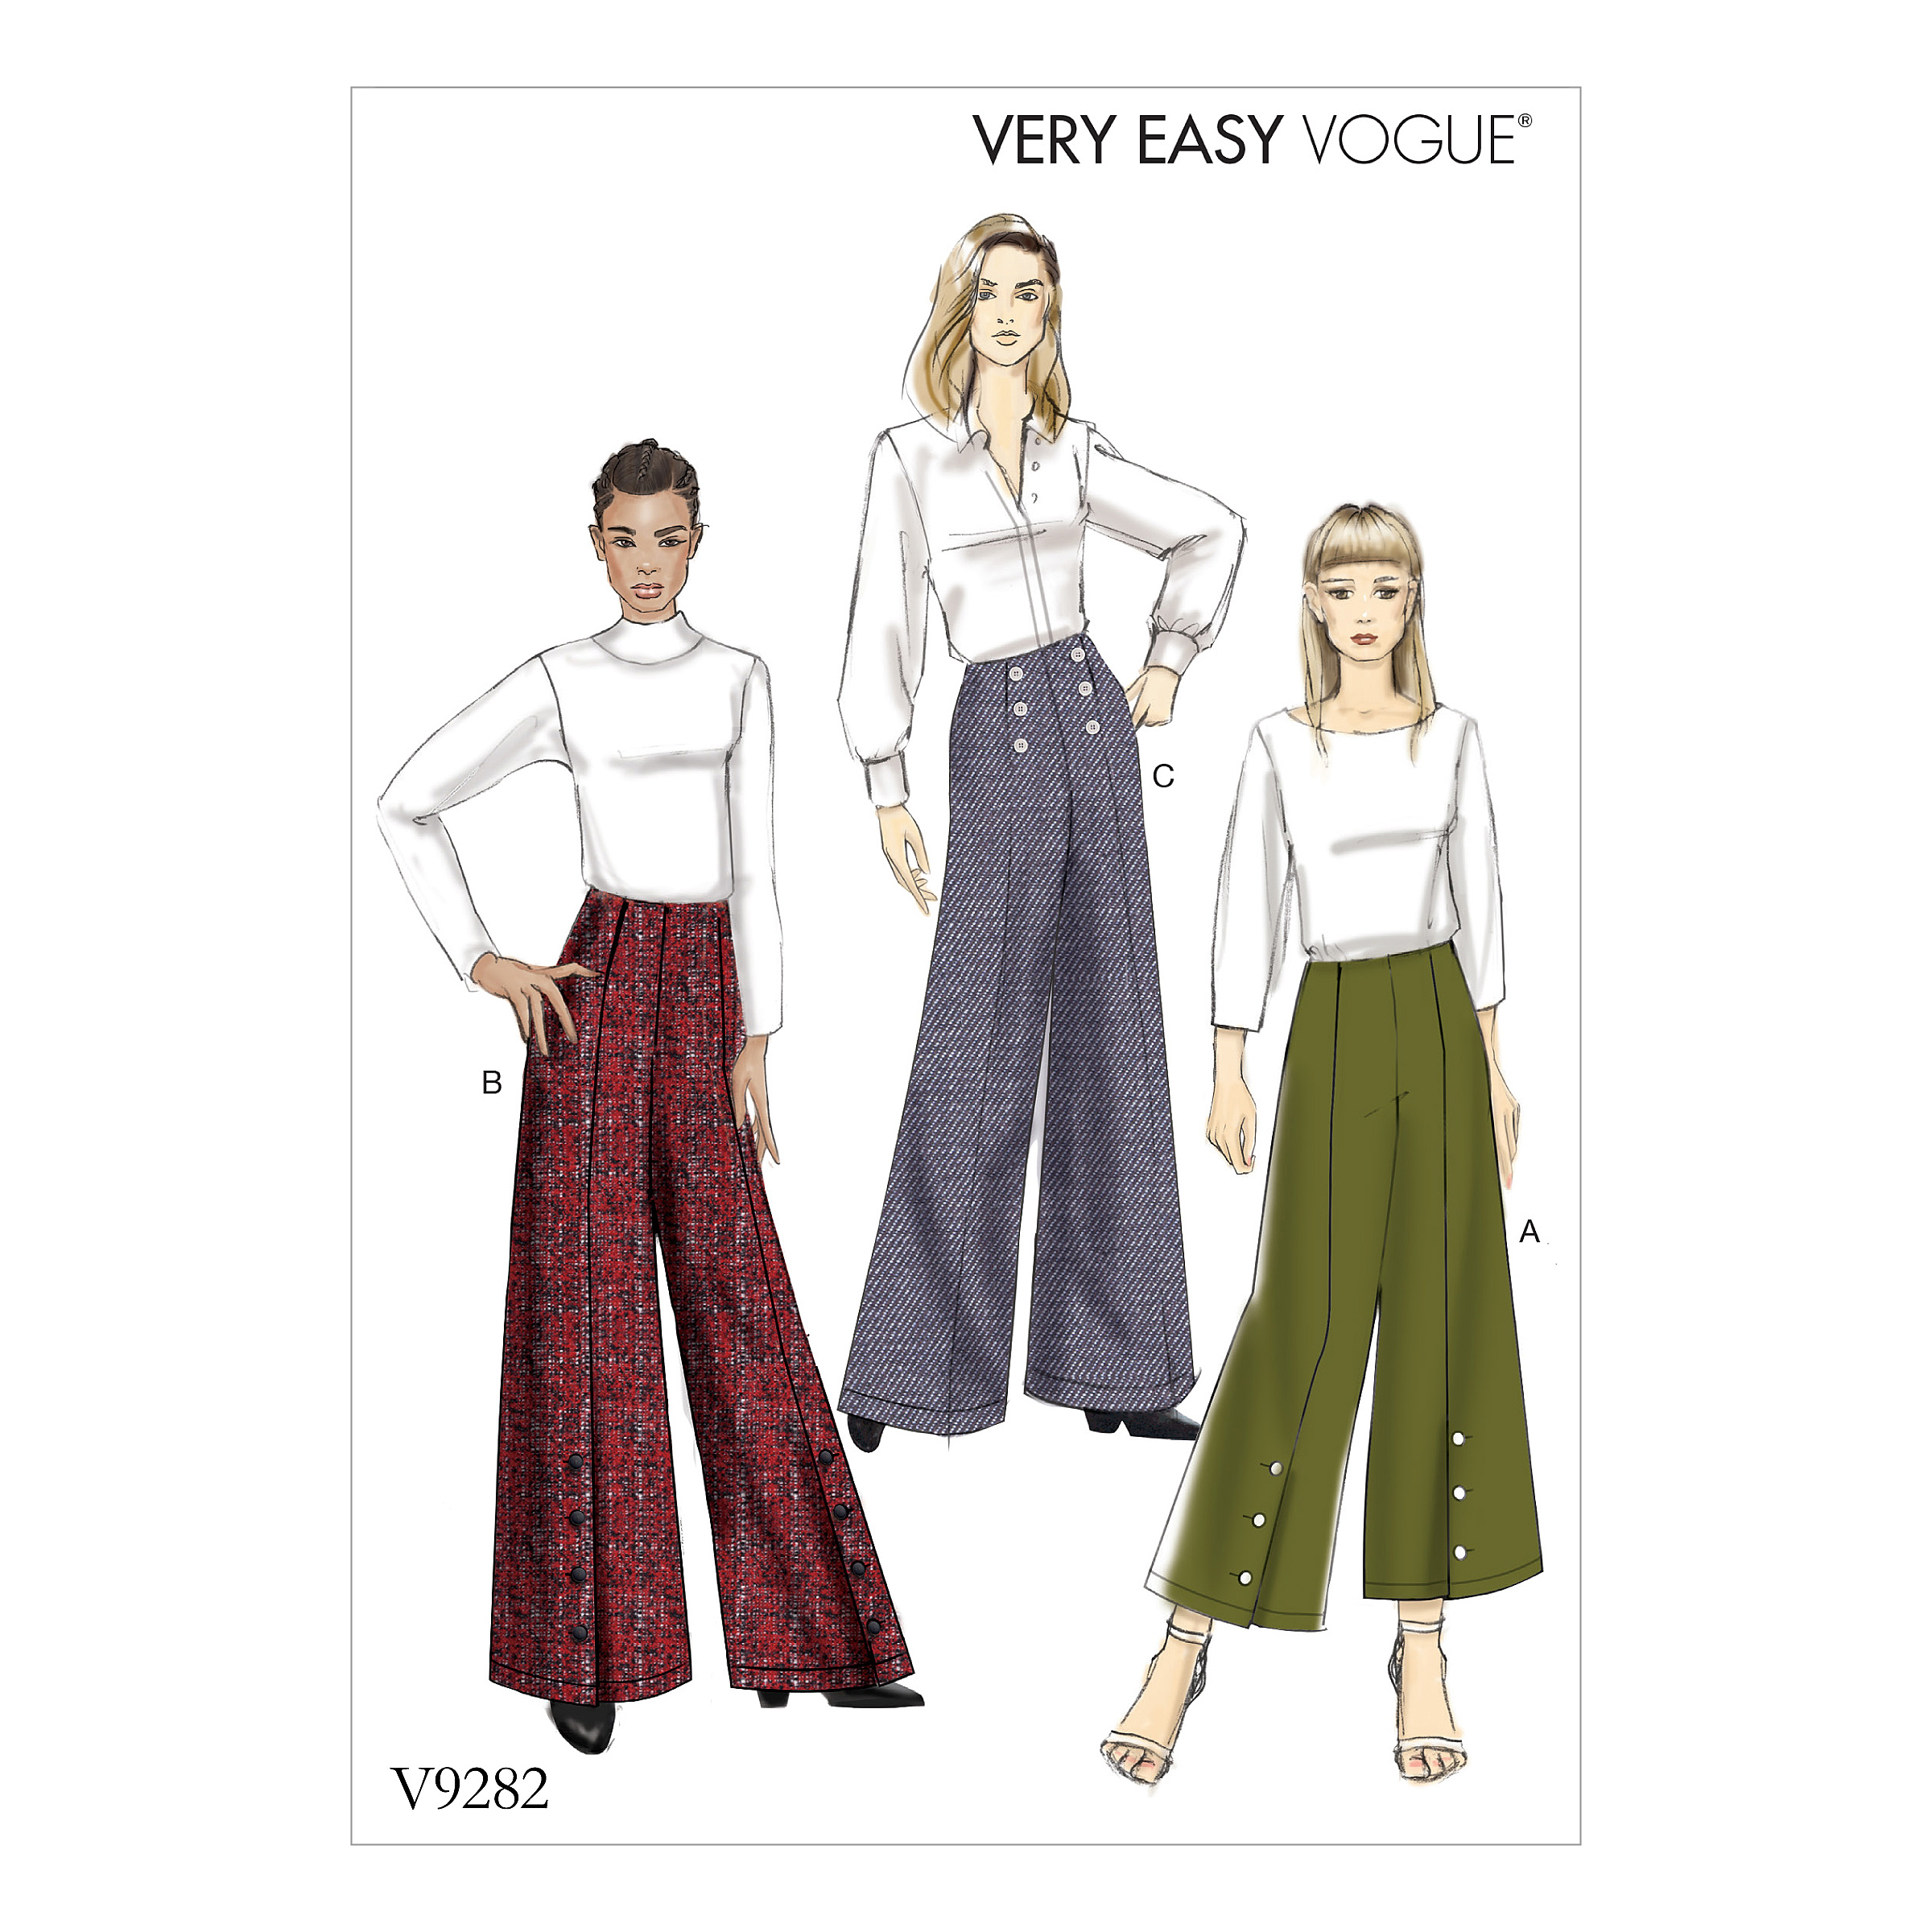 Vogue Patterns 9282 MISSES' HIGH-WAISTED PANTS WITH BUTTON DETAIL